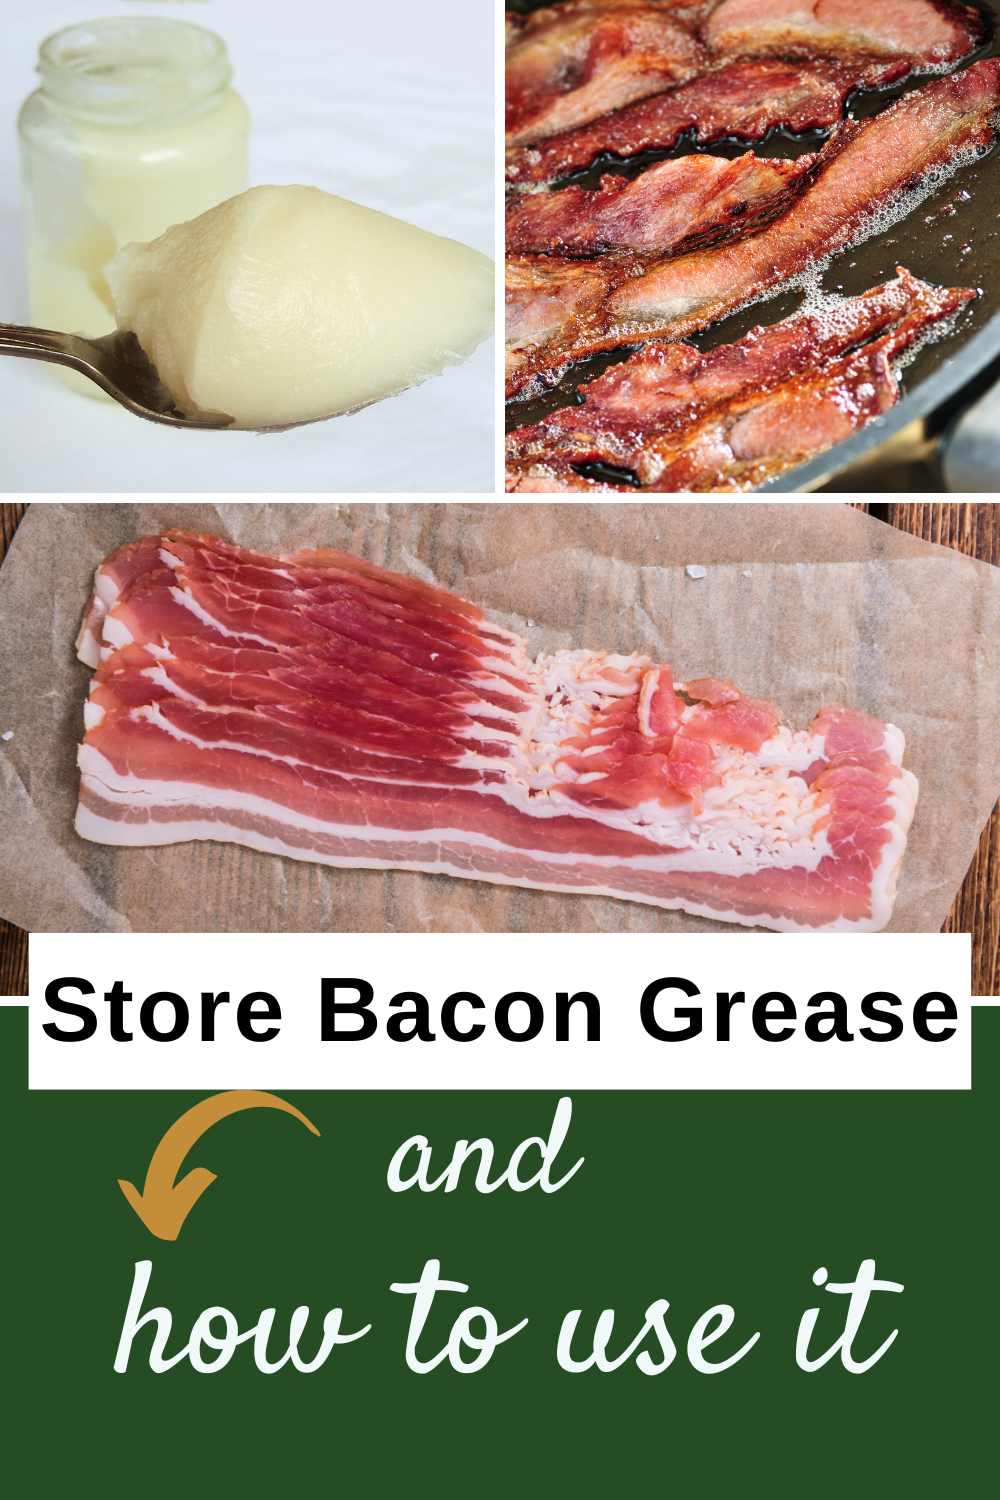 https://simplifylivelove.com/wp-content/uploads/2017/01/how-to-store-bacon-grease-1.jpg